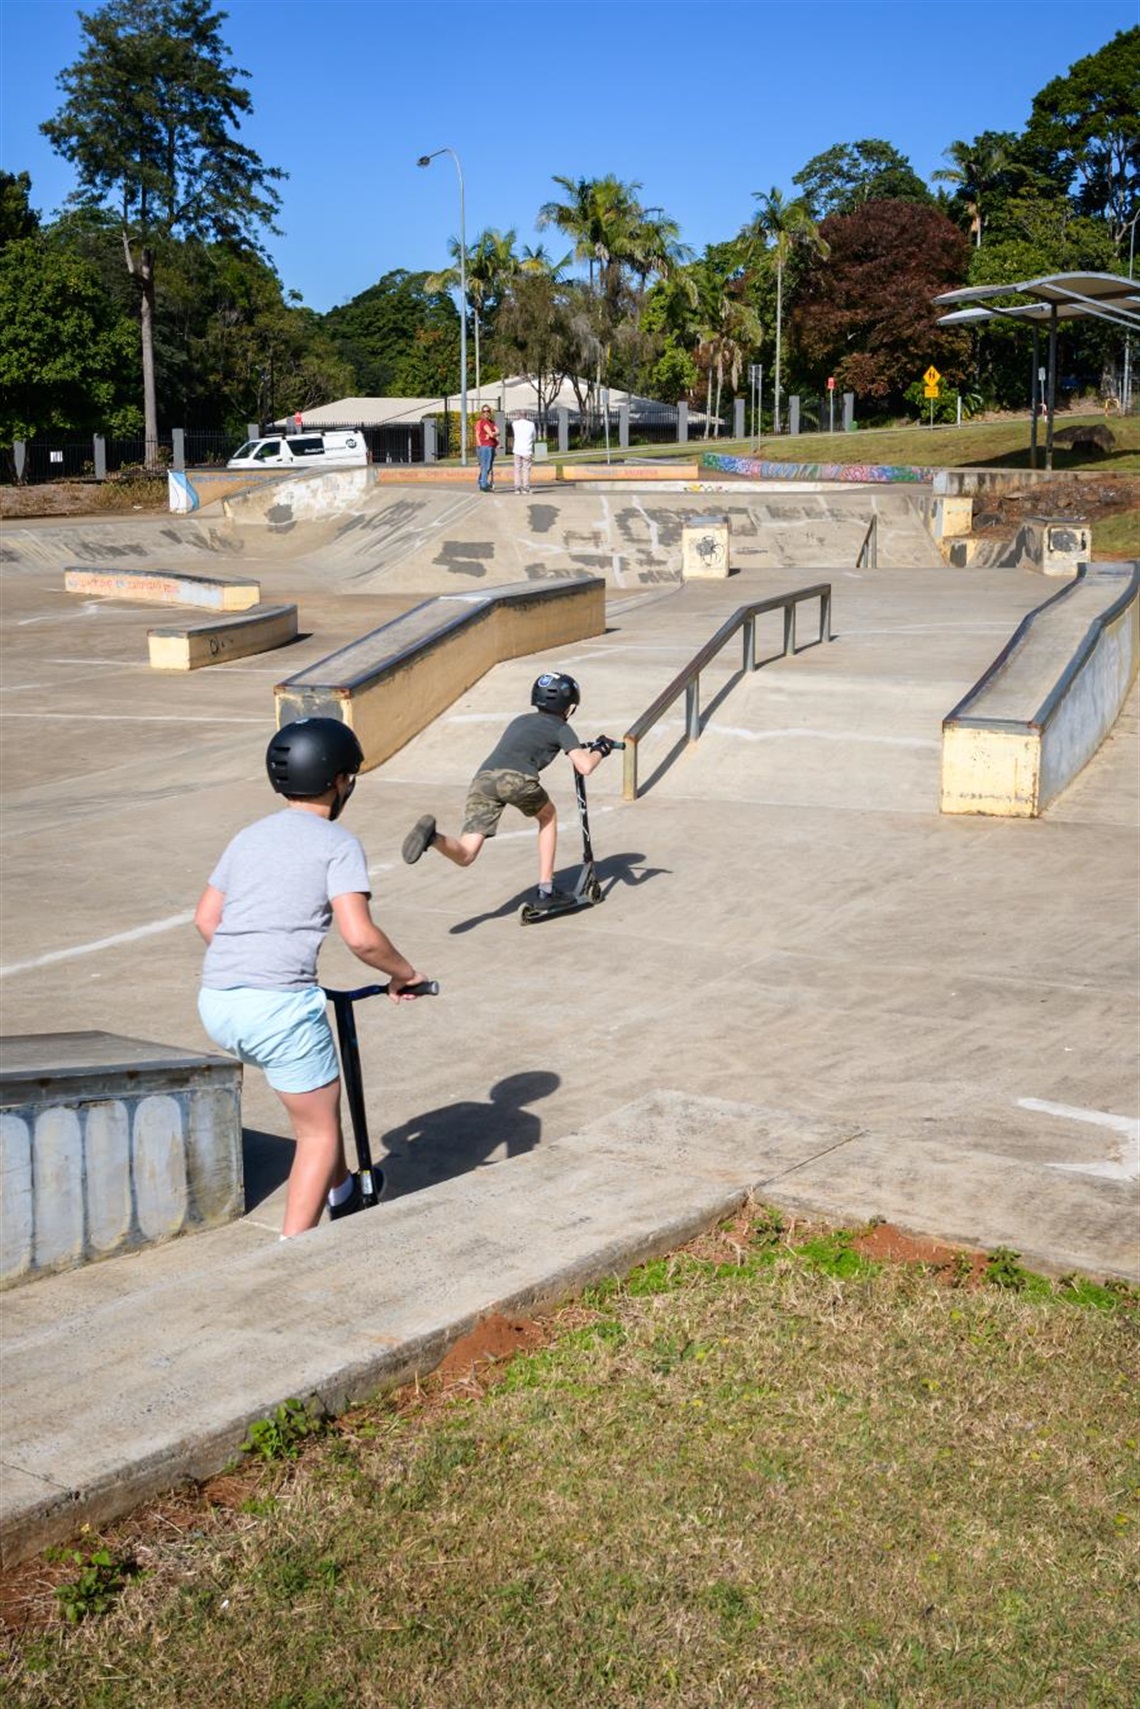 Kids on scooters at the Goonellabah Skate Park.